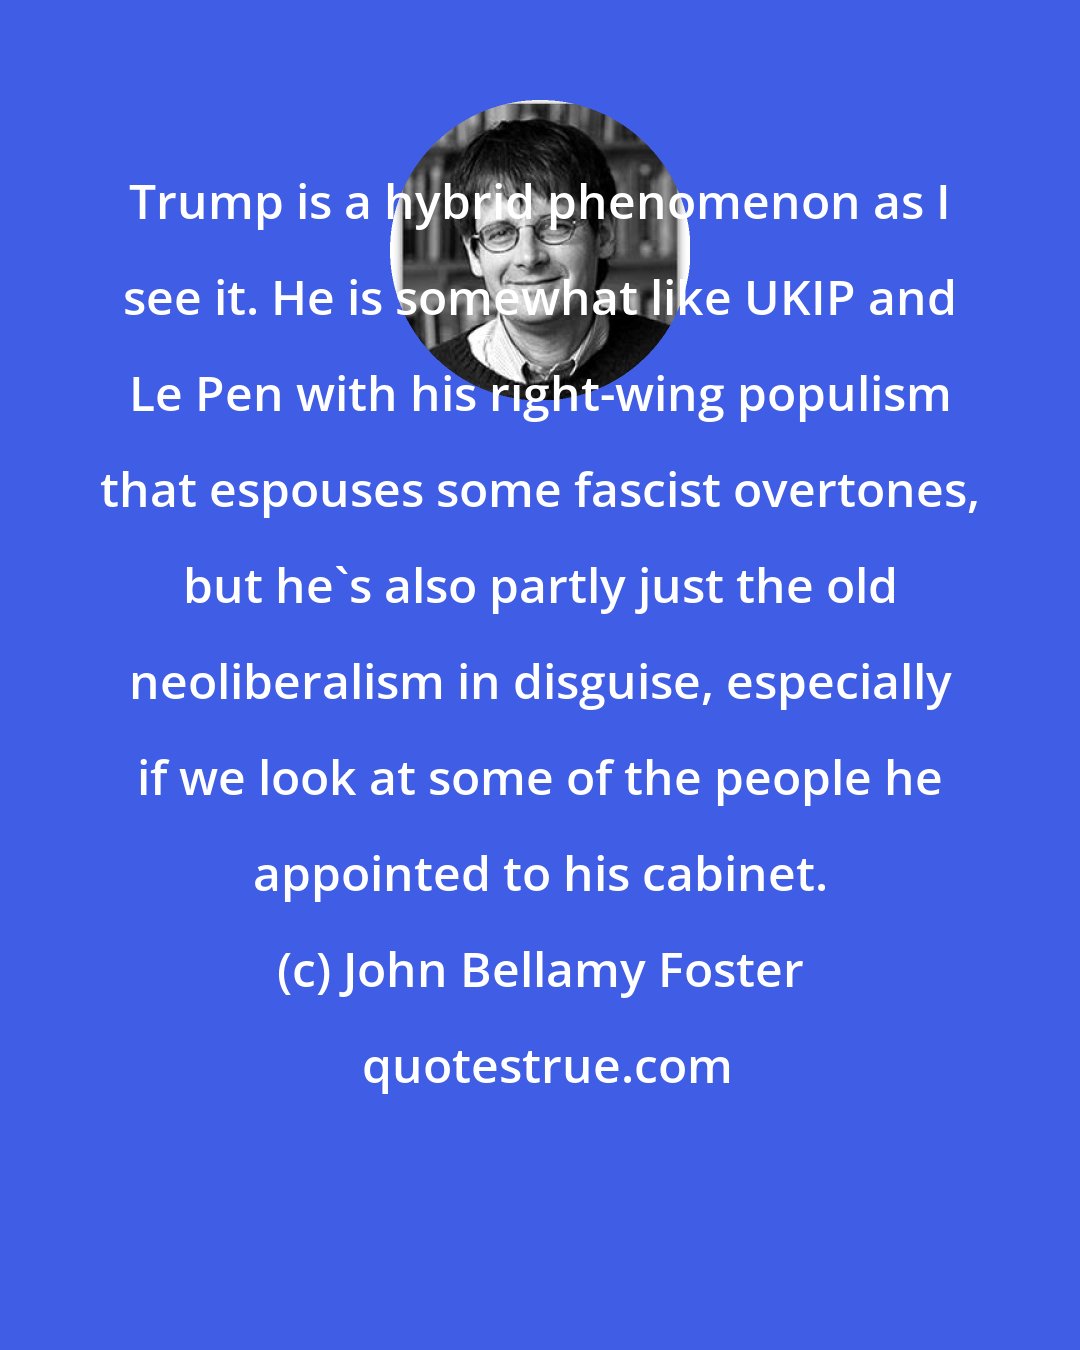 John Bellamy Foster: Trump is a hybrid phenomenon as I see it. He is somewhat like UKIP and Le Pen with his right-wing populism that espouses some fascist overtones, but he's also partly just the old neoliberalism in disguise, especially if we look at some of the people he appointed to his cabinet.